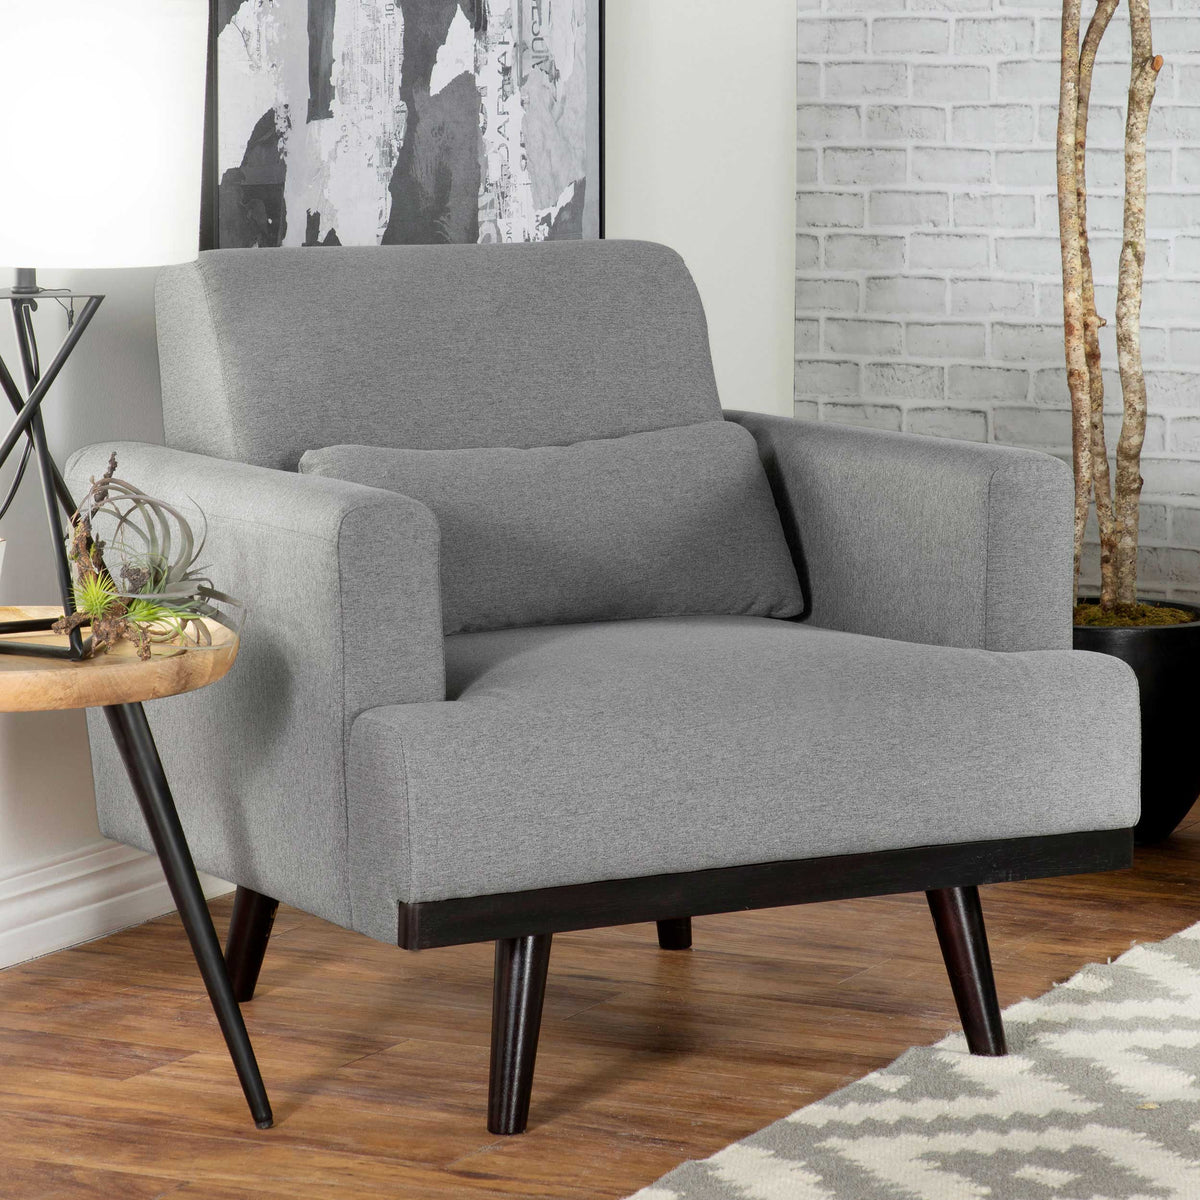 Blake Upholstered Chair with Track Arms Sharkskin and Dark Brown  Las Vegas Furniture Stores